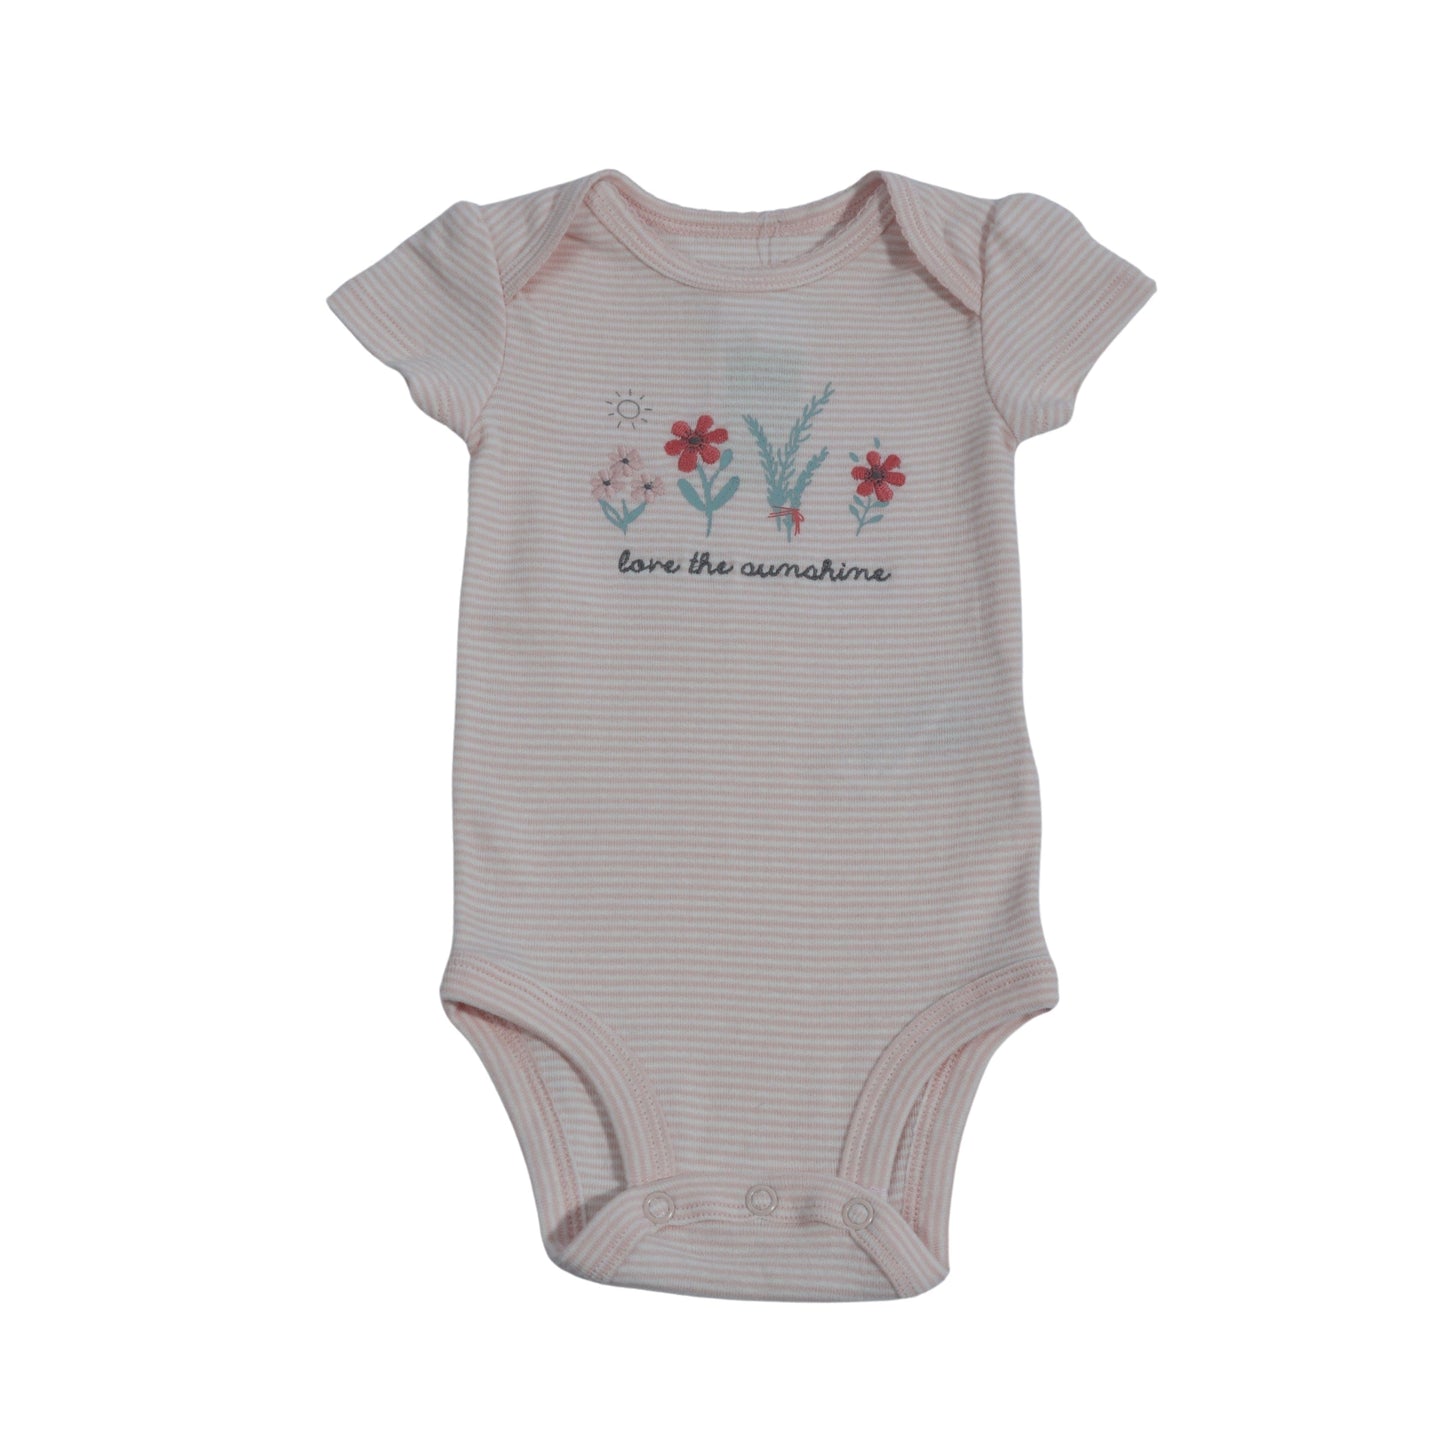 CARTER'S Baby Girl 3 Month / Pink CARTER'S - Baby - Front Love The Sunshine Embroidery Bodysuit